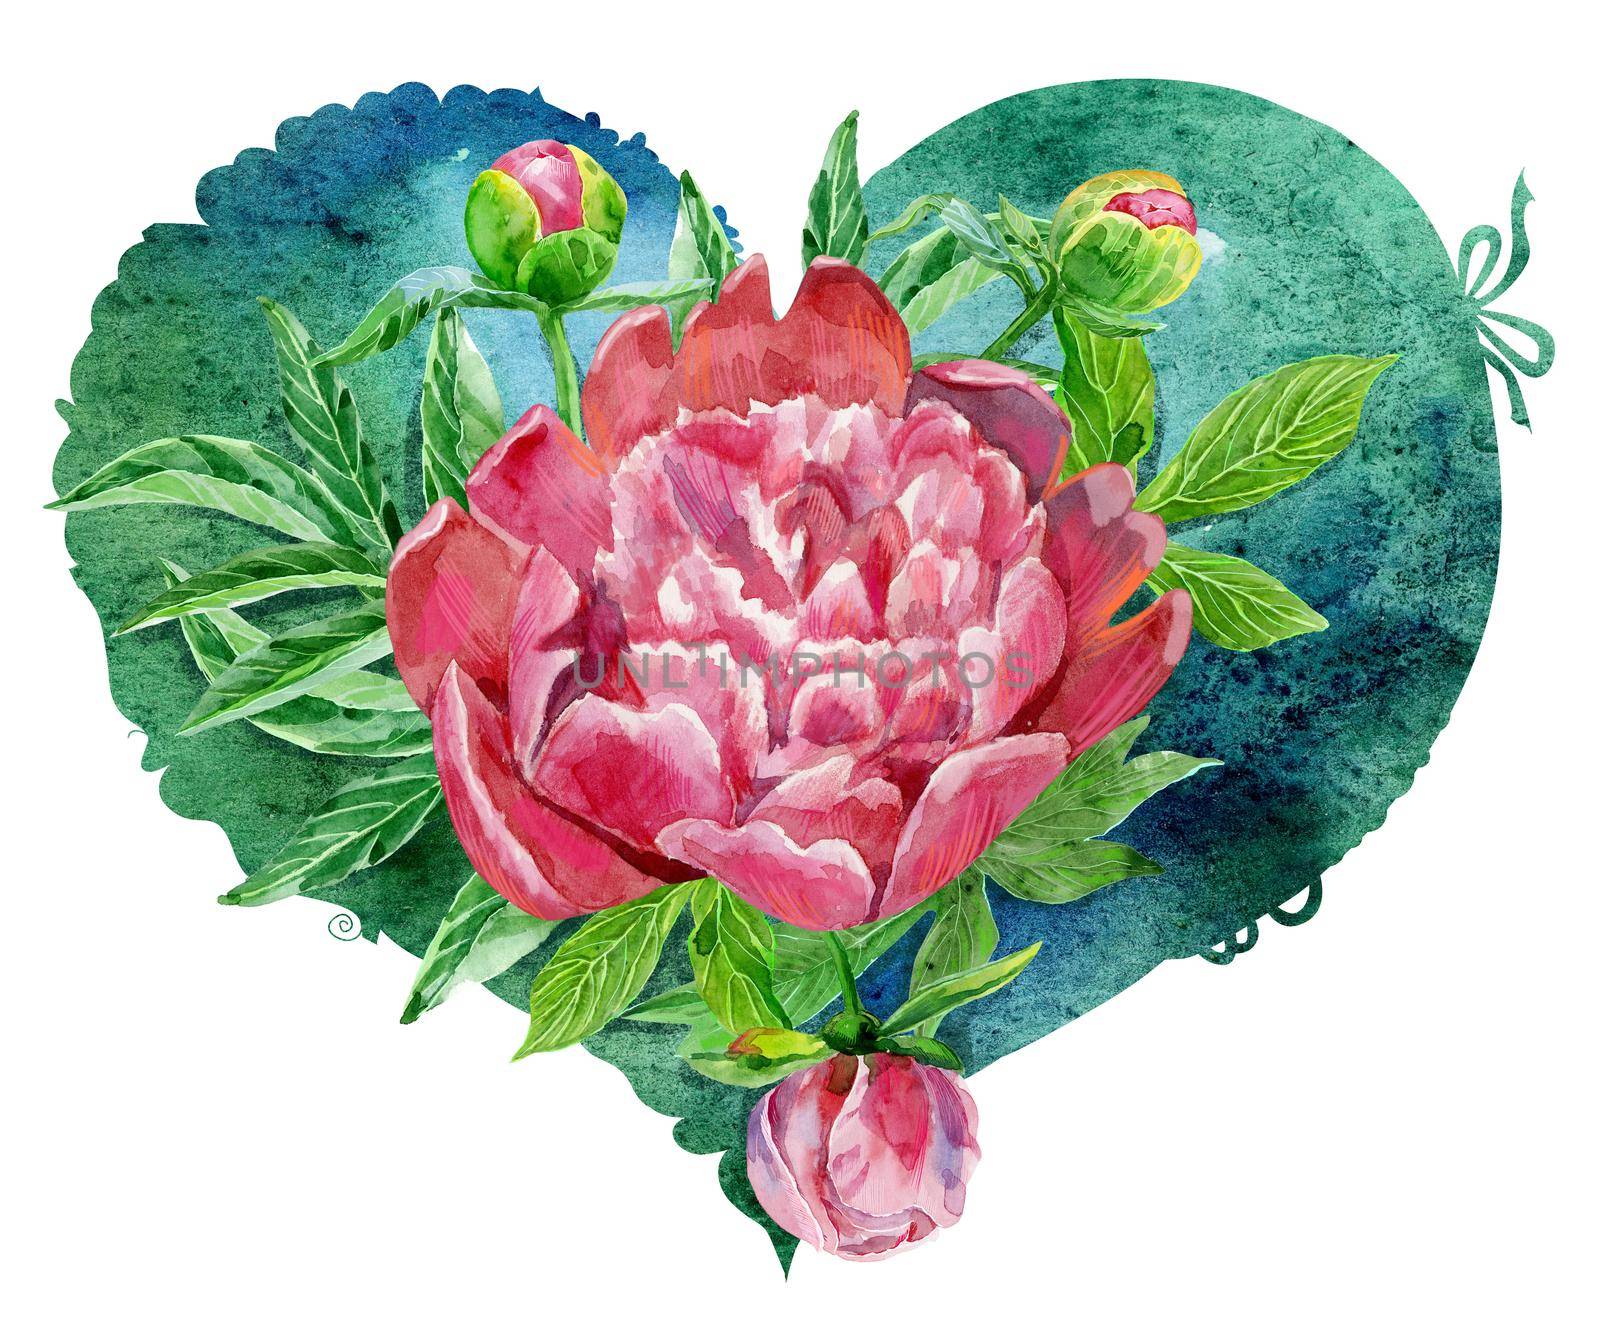 watercolor green heart with pink peonies by NataOmsk